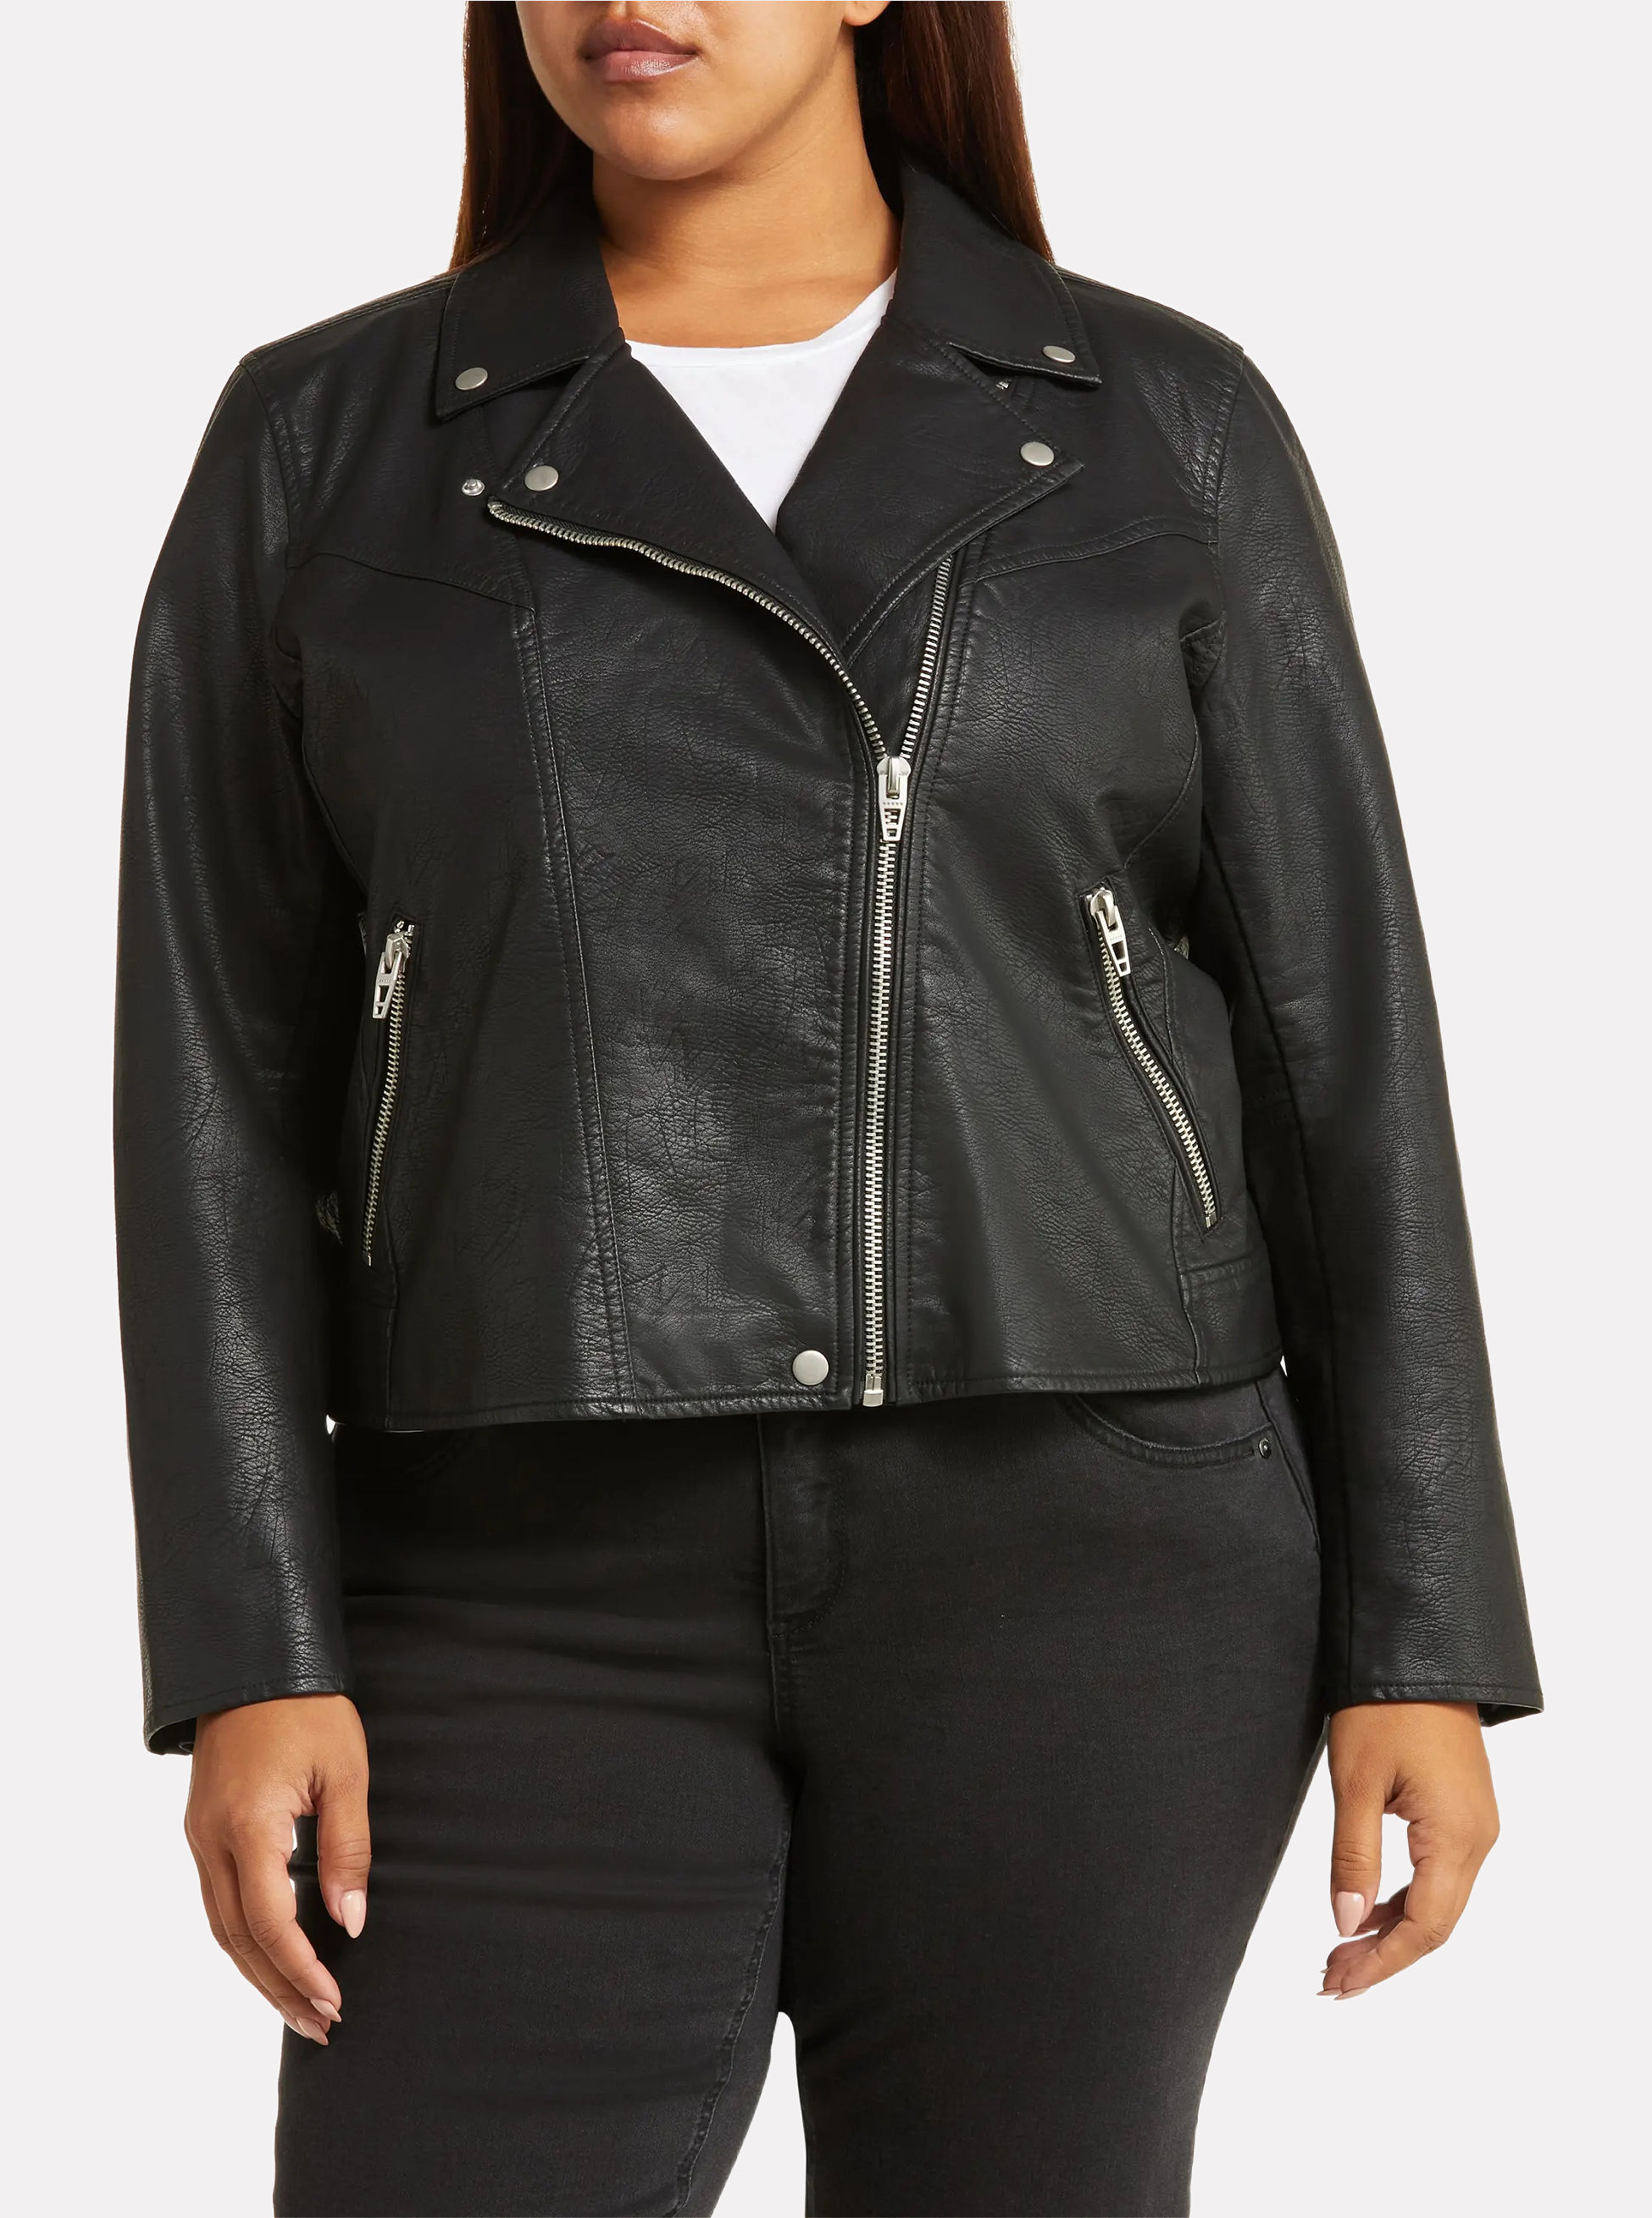 How to Wear a Leather Jacket: 10 Styles to Shop Now